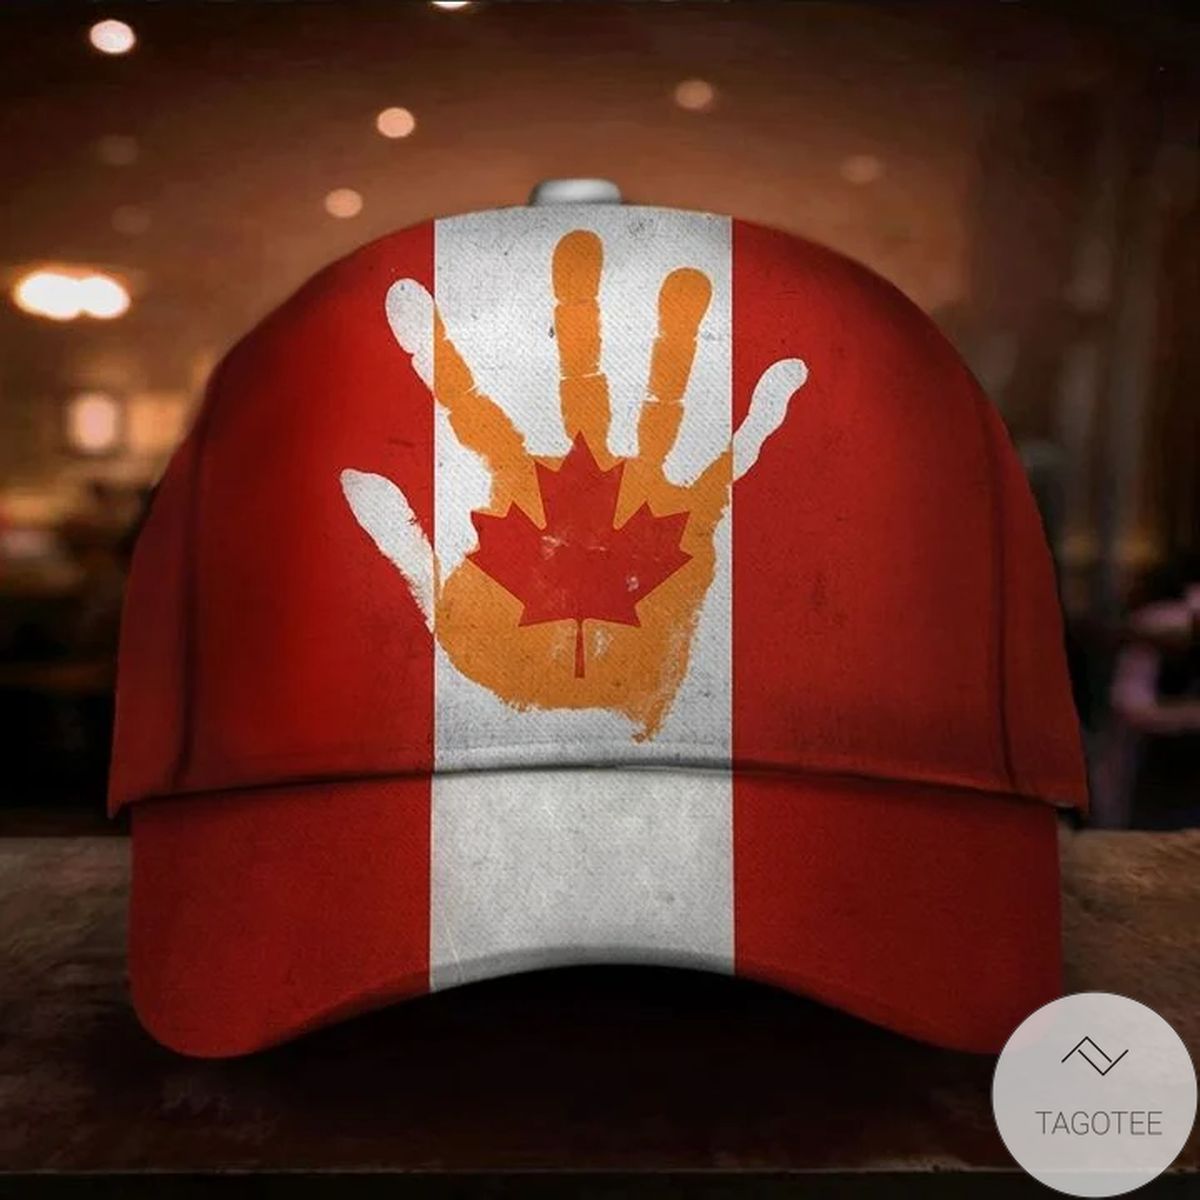 Every Child Matters Canada Flag Hat Orange Shirt Day Merch Honor Indigenous Children Education